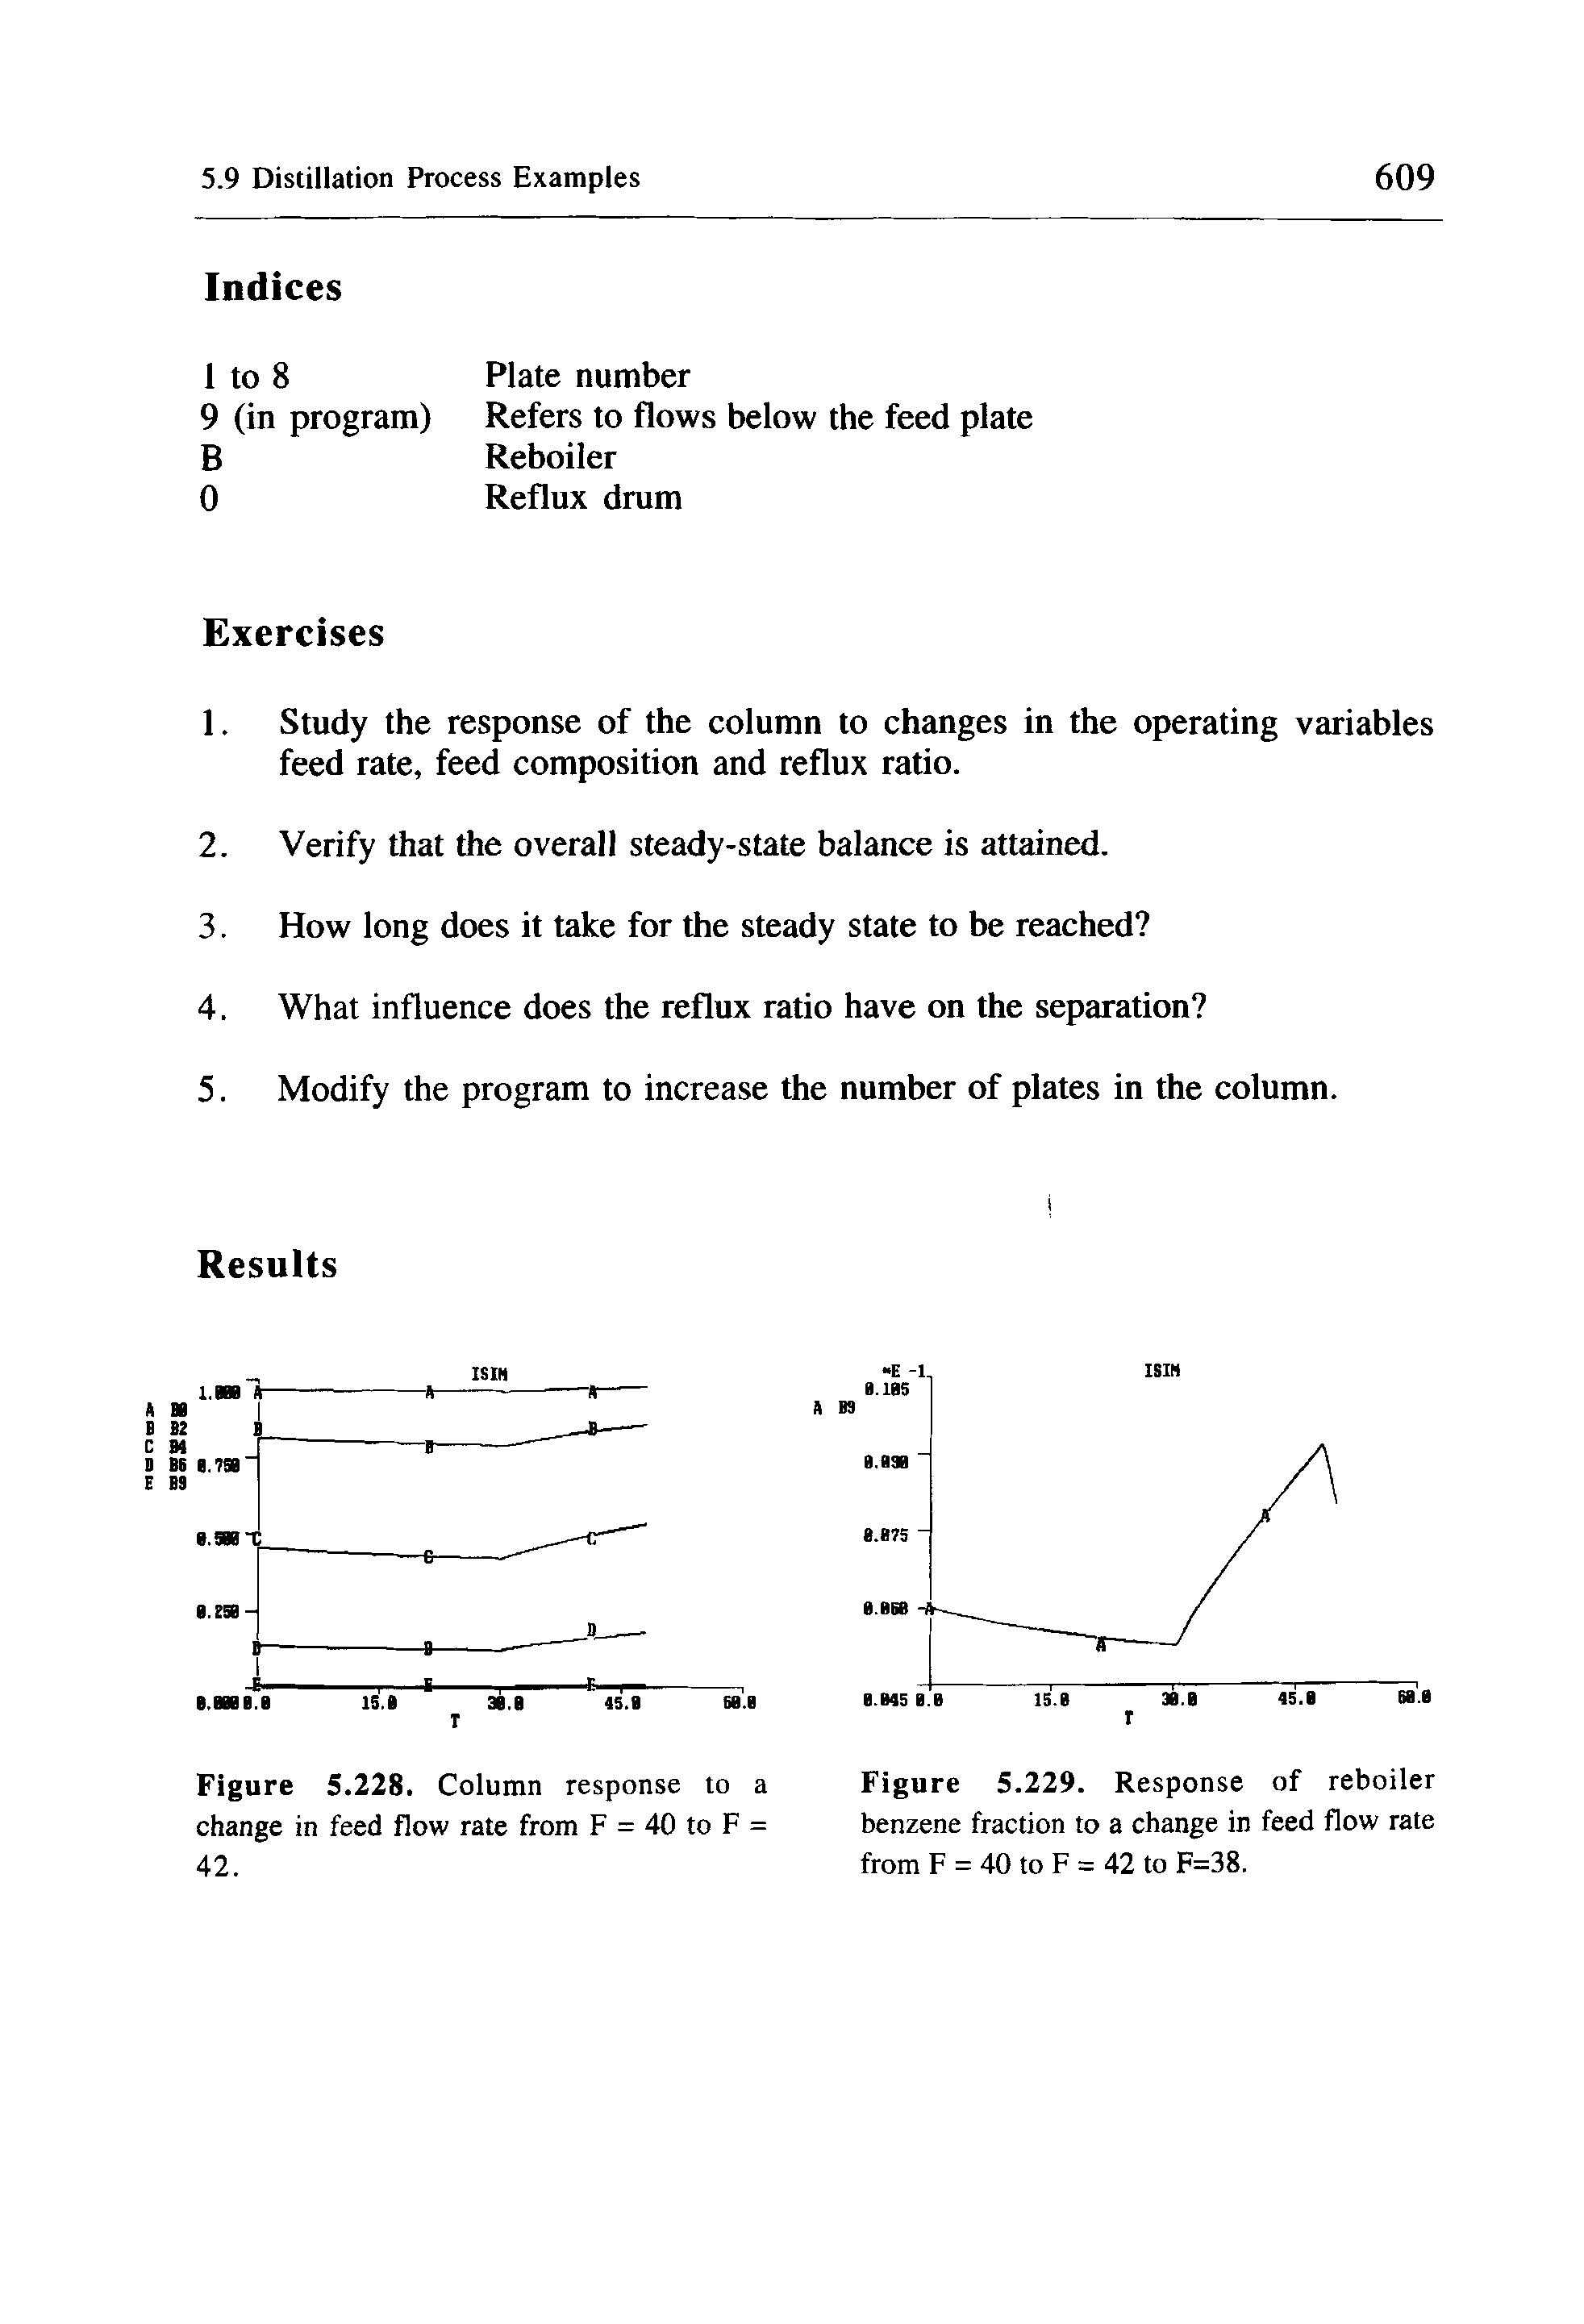 Figure 5.229. Response of reboiler benzene fraction to a change in feed flow rate from F = 40 to F = 42 to F=38,...